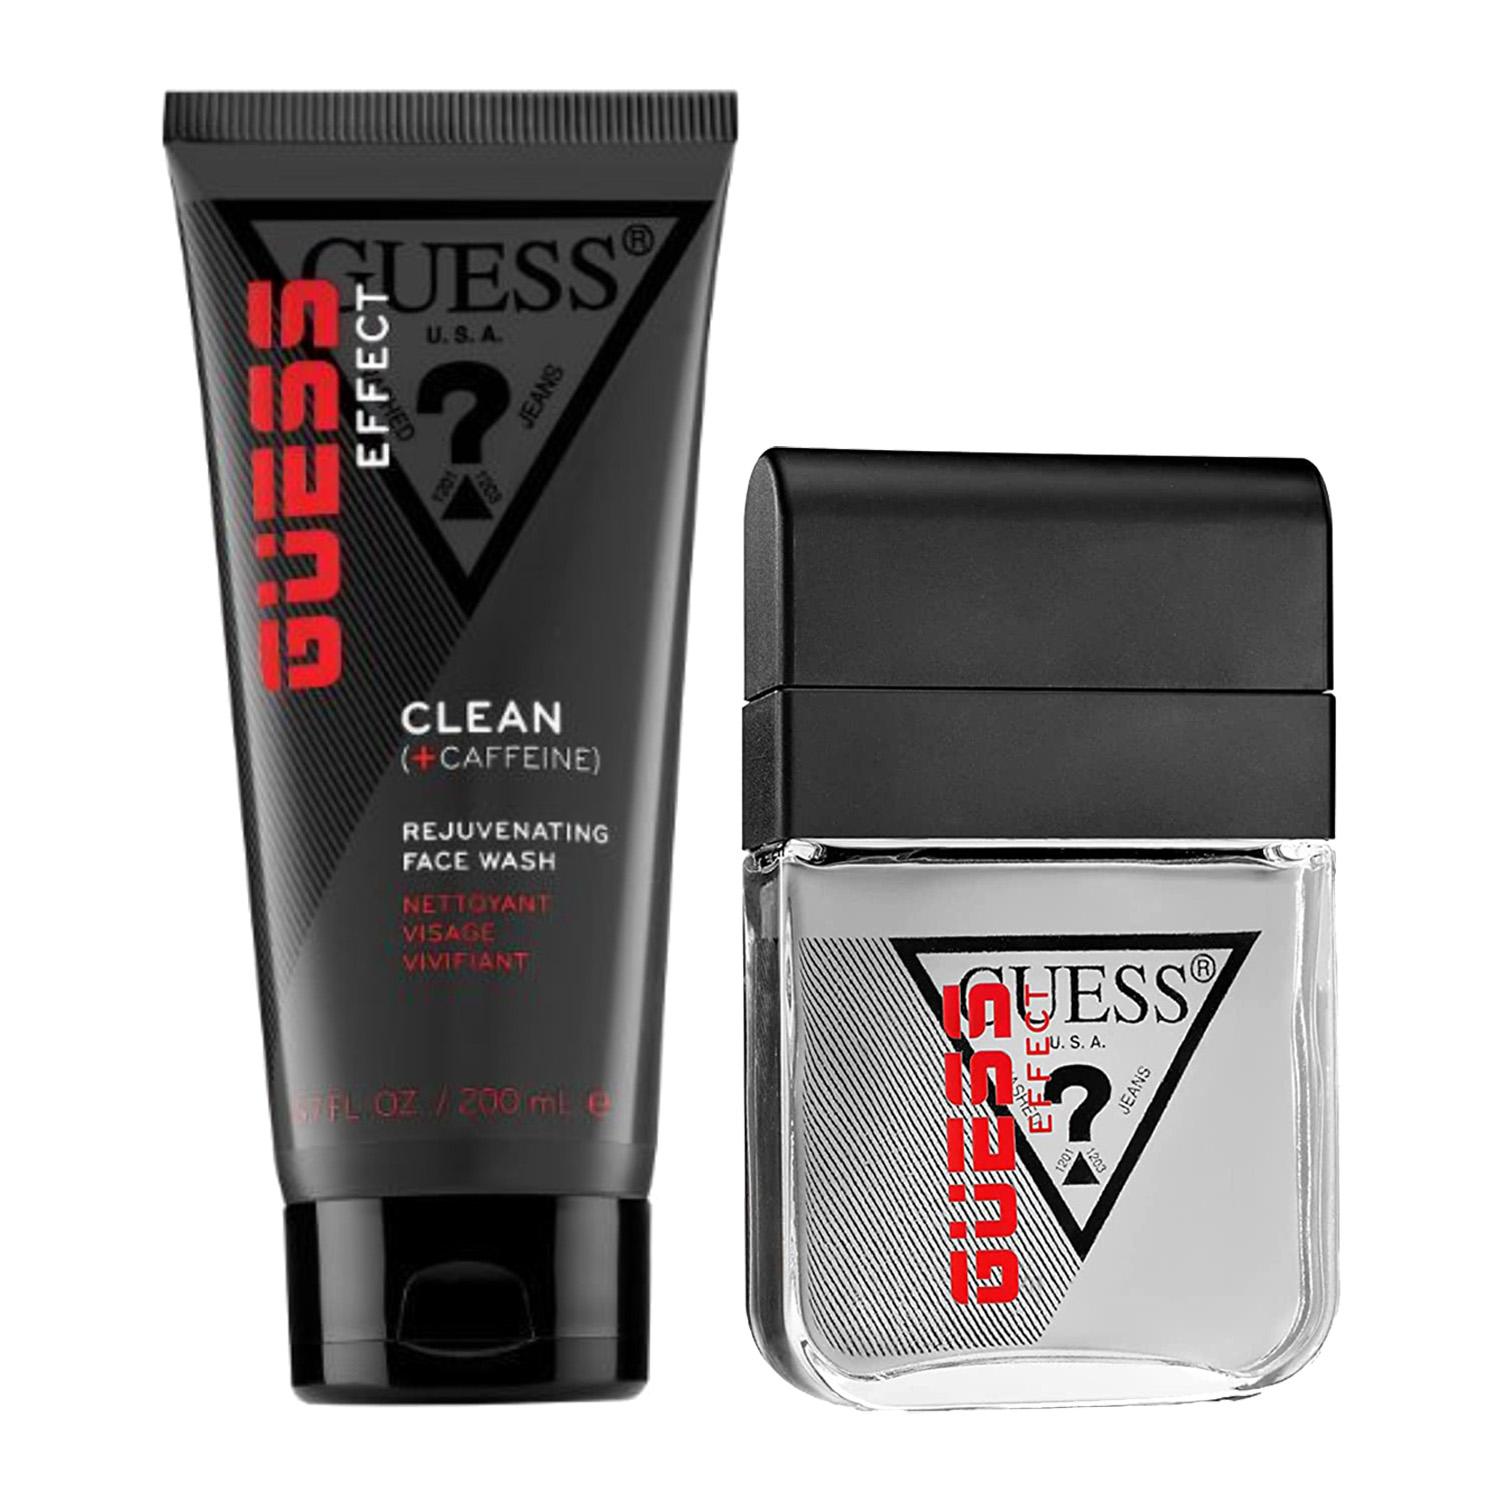 Guess | Guess Effect Cool Aftershave (100 ml) & Caffeine Rejuvenating Face Wash (200 ml) Combo